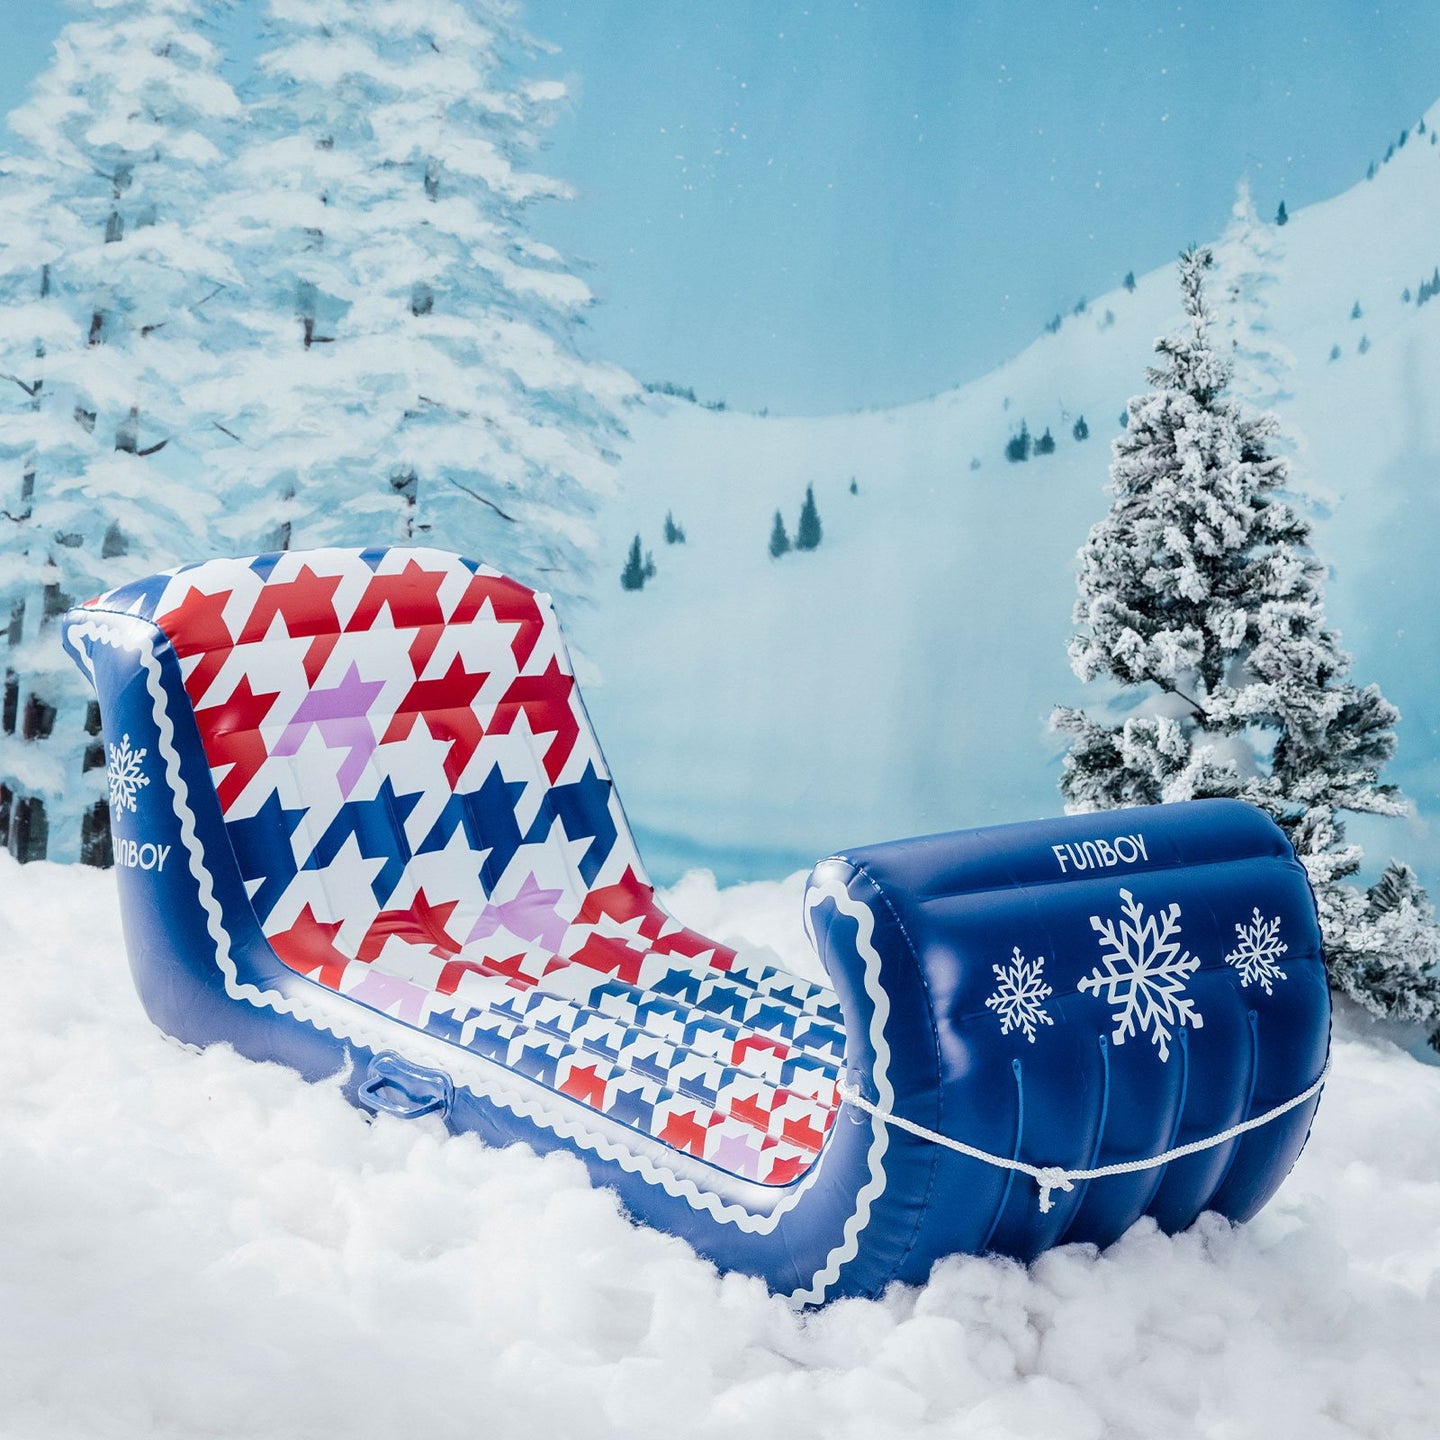 Snow Sled - Houndstooth Sleigh by FUNBOY